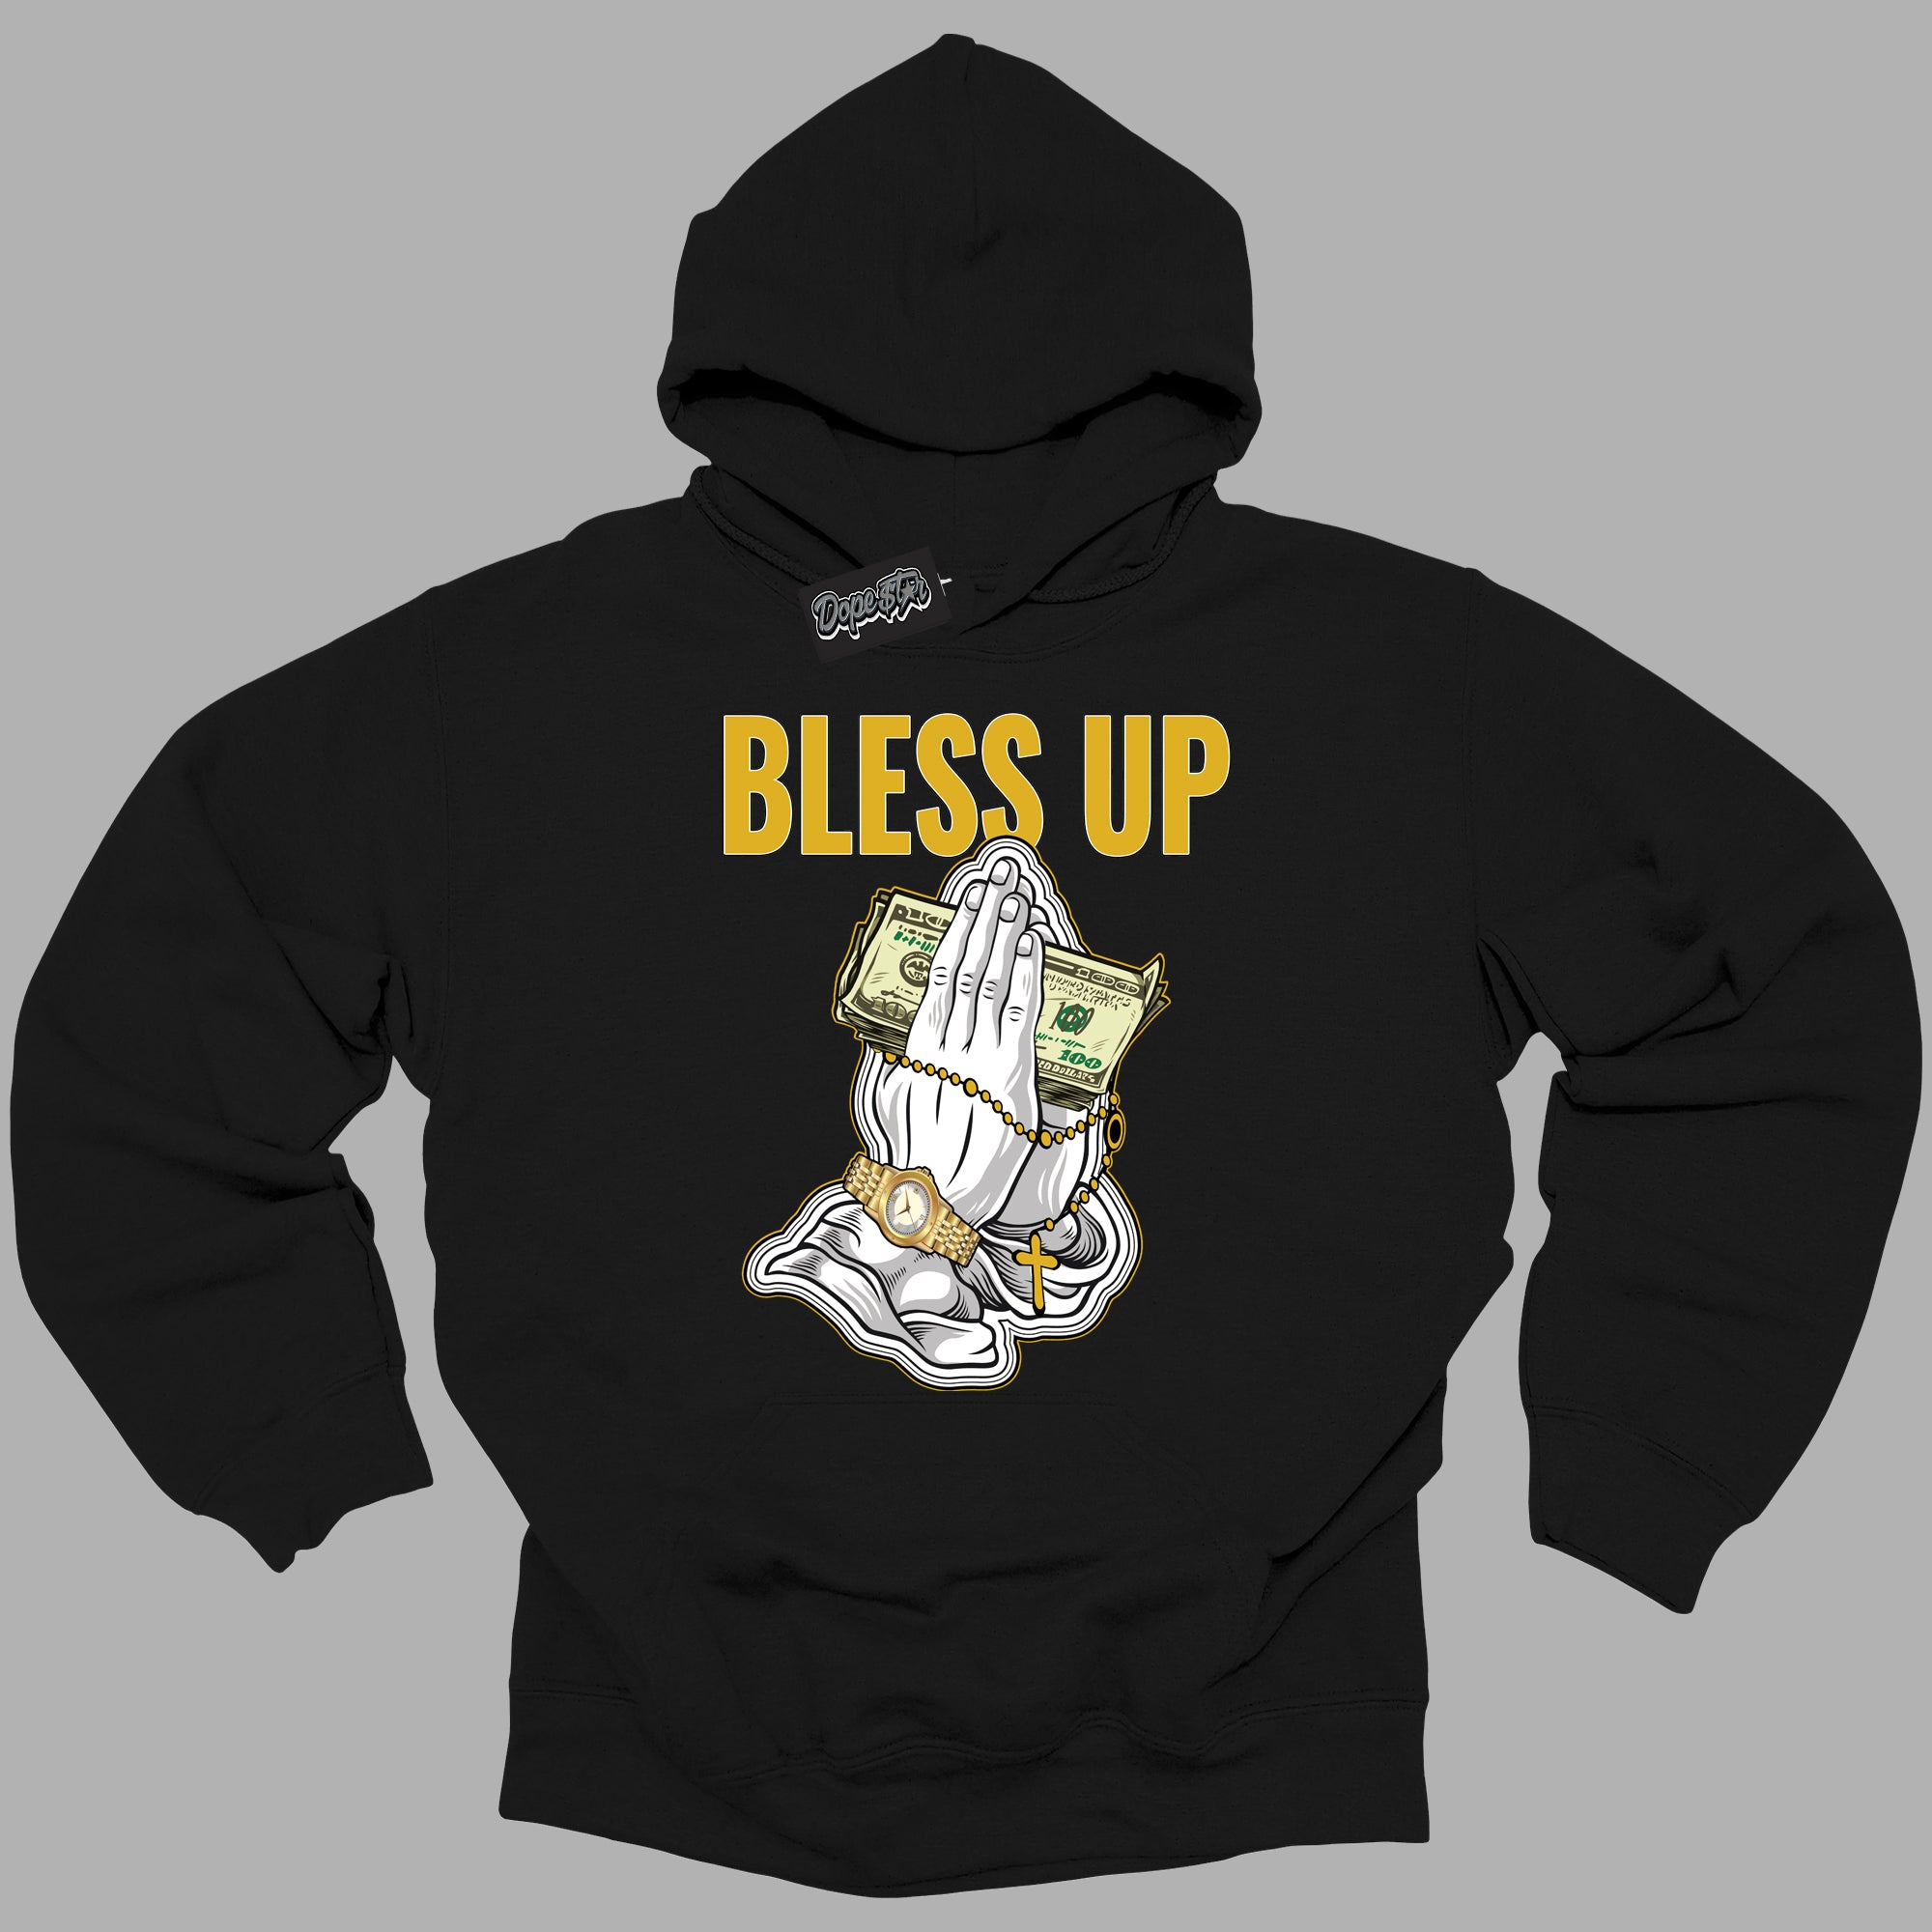 Cool Black Hoodie with “ Bless Up ”  design that Perfectly Matches Yellow Ochre 6s Sneakers.